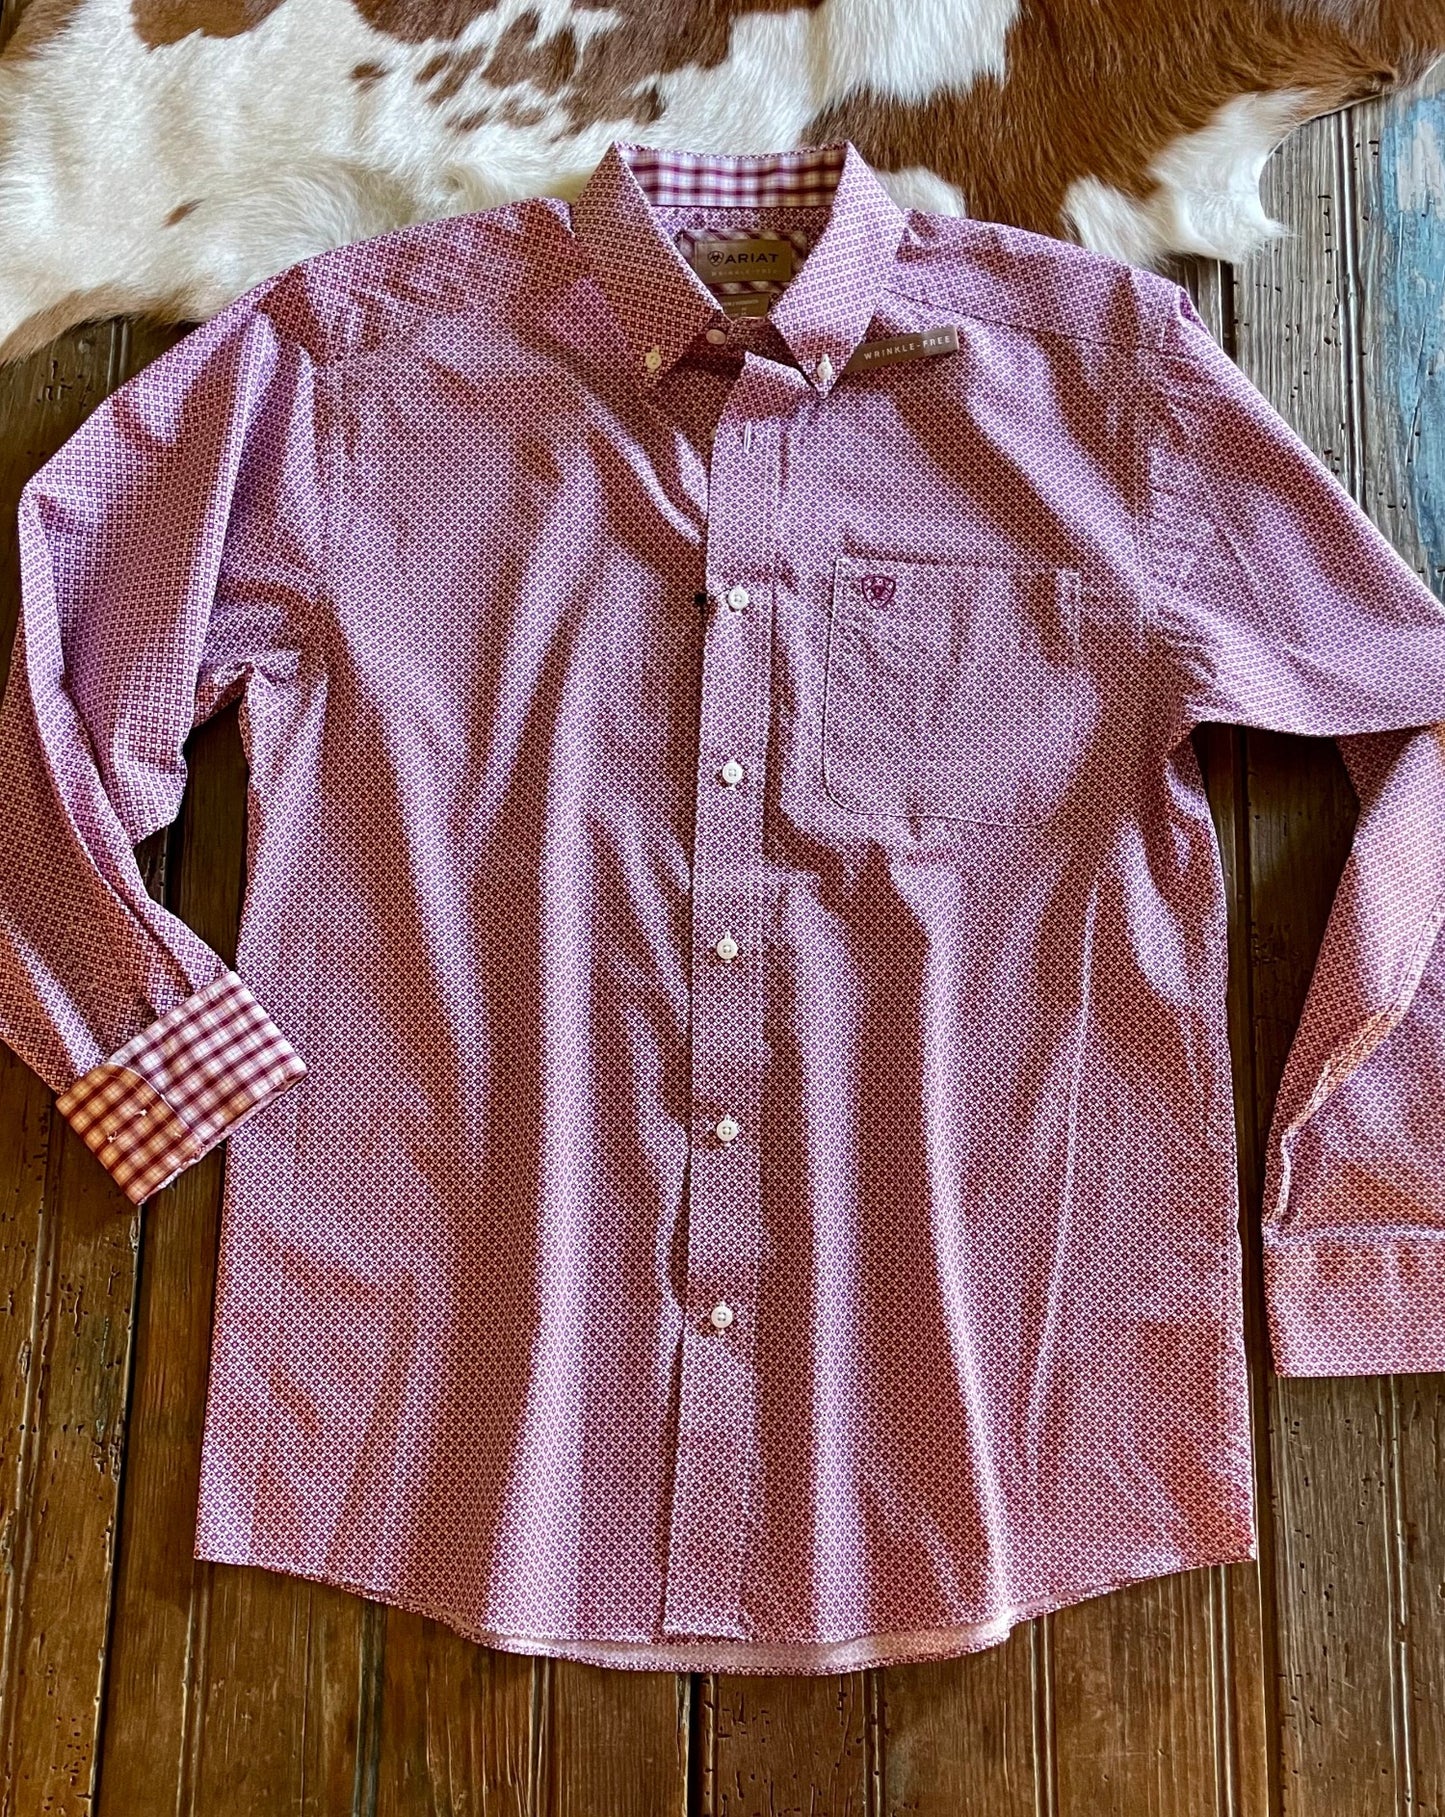 Ariat Wrinkle Free Vince Classic Fit Shirt (Men's)